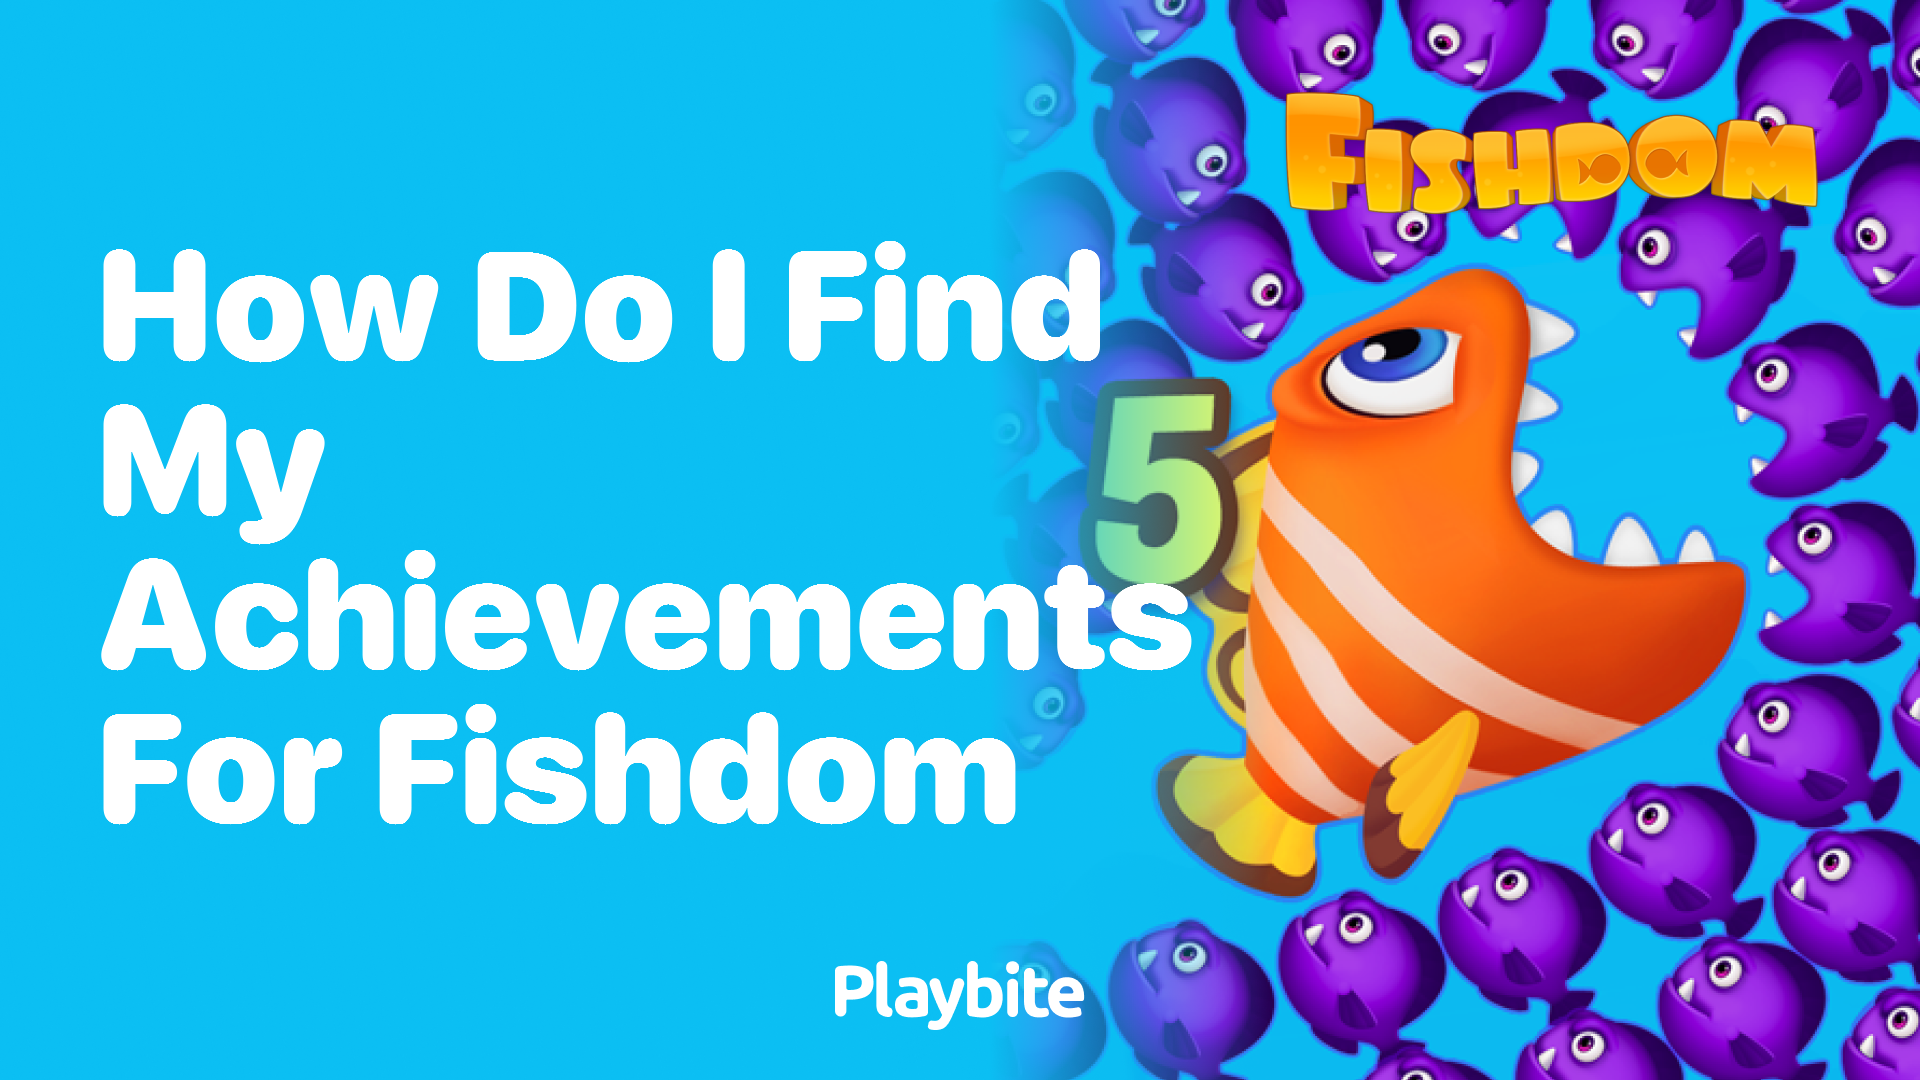 How Do I Find My Achievements for Fishdom?